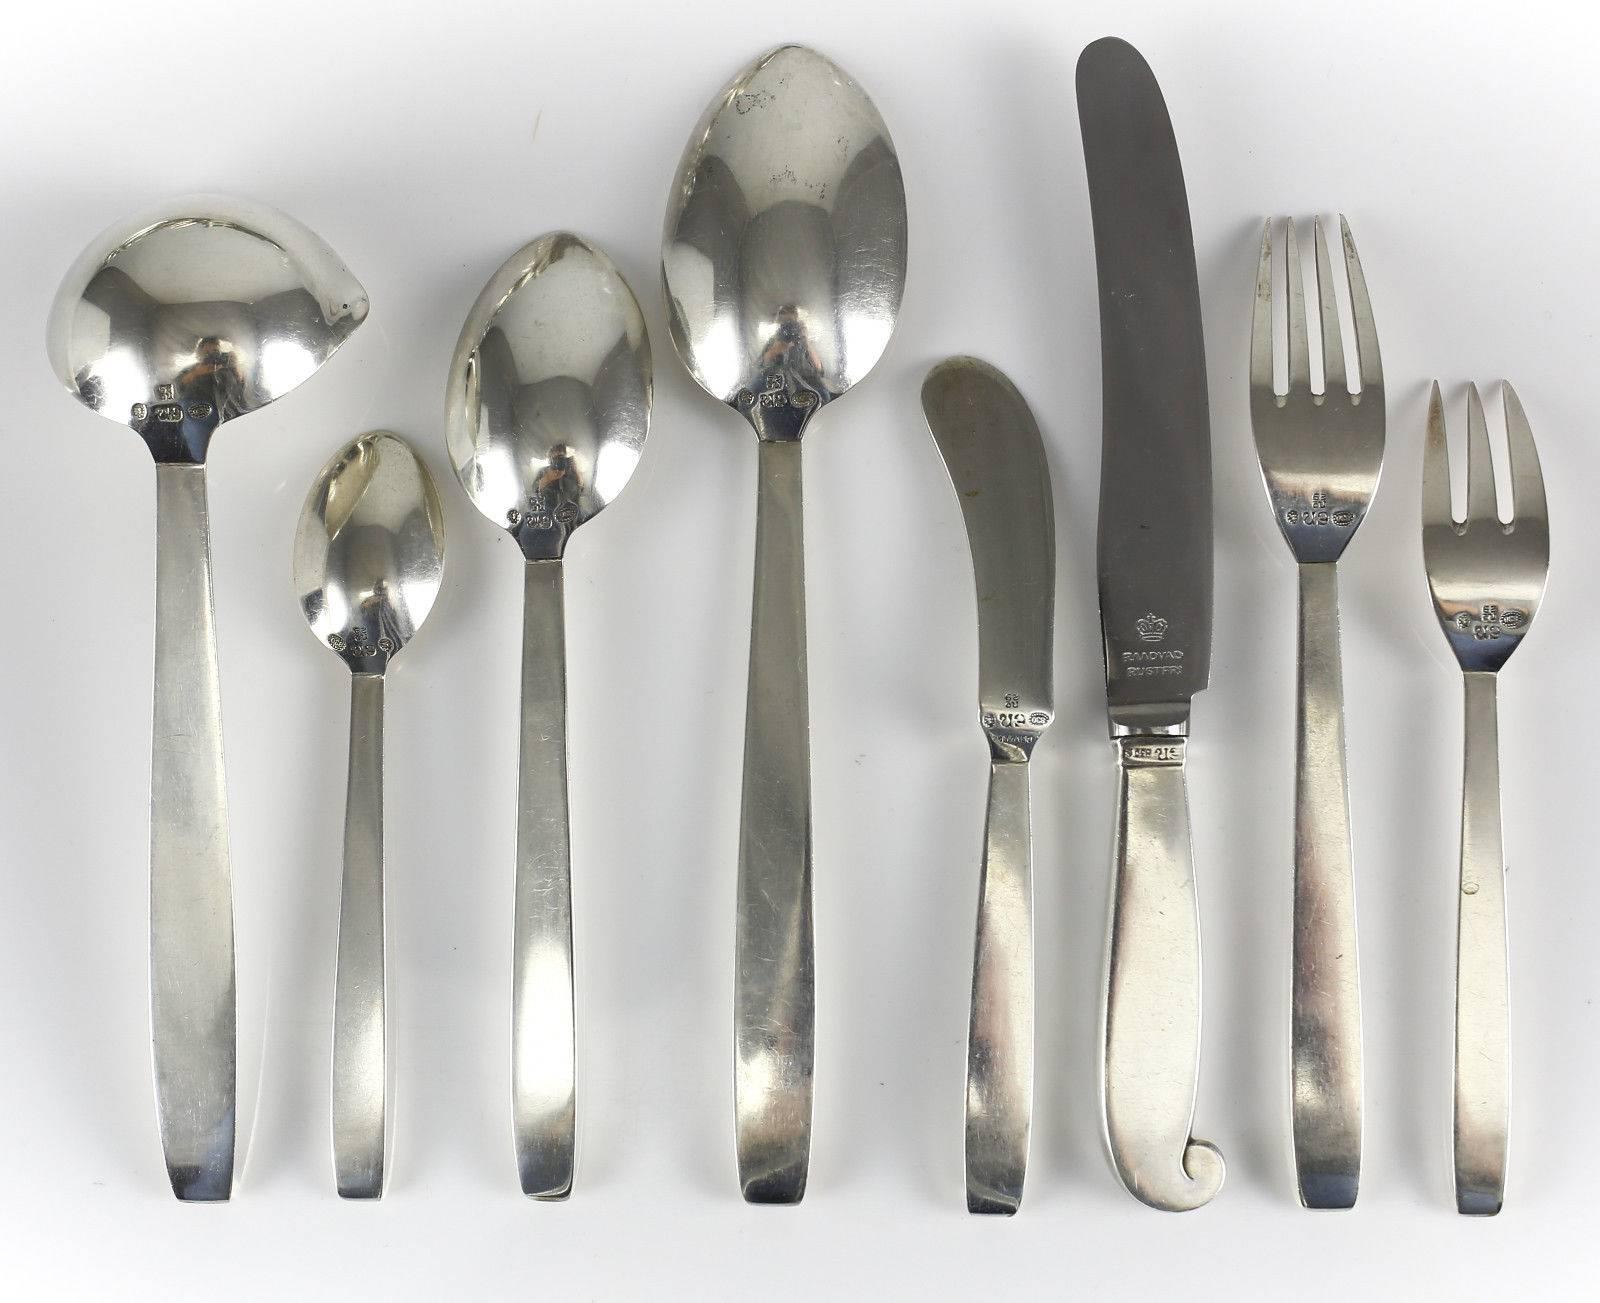 A 52-piece Evald Nielsen .830 Danish silver five-piece service for eight, flatware set in pattern 29, circa 1930. Rare to find a set from this vintage.

This is known as one of the earliest flatware patterns designed by Evald Nielsen, the early